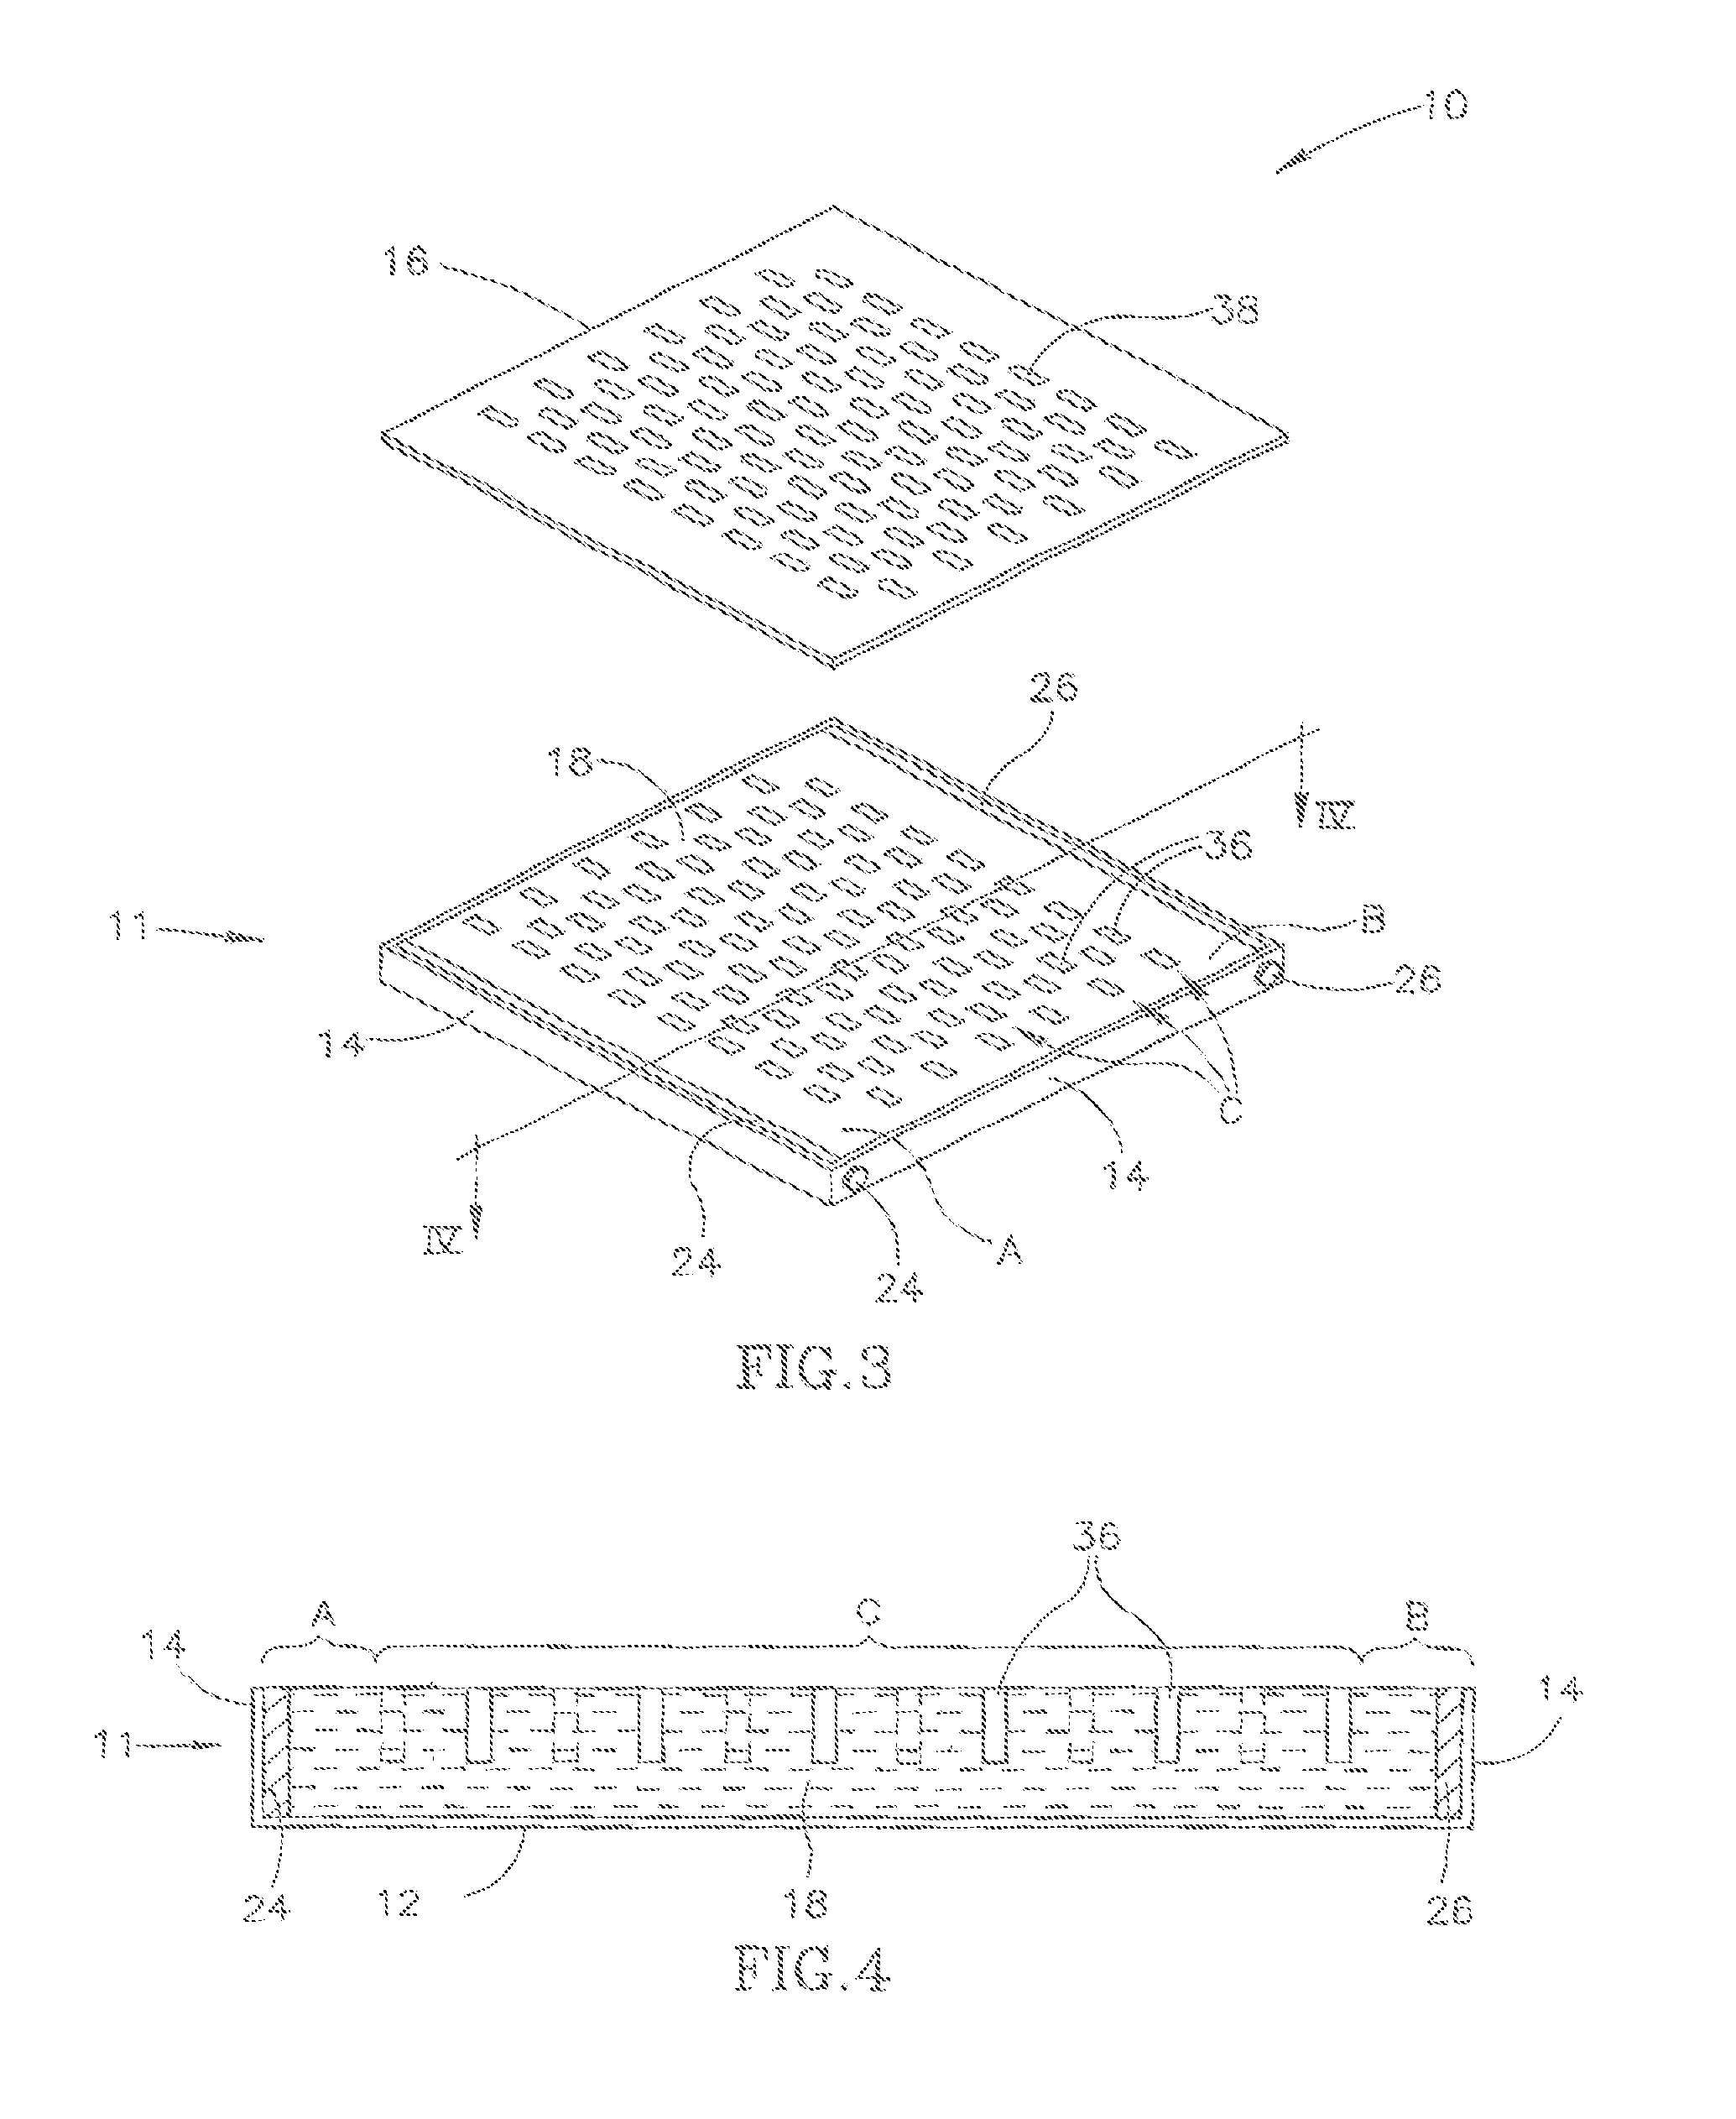 Apparatus and method for electrophoresis